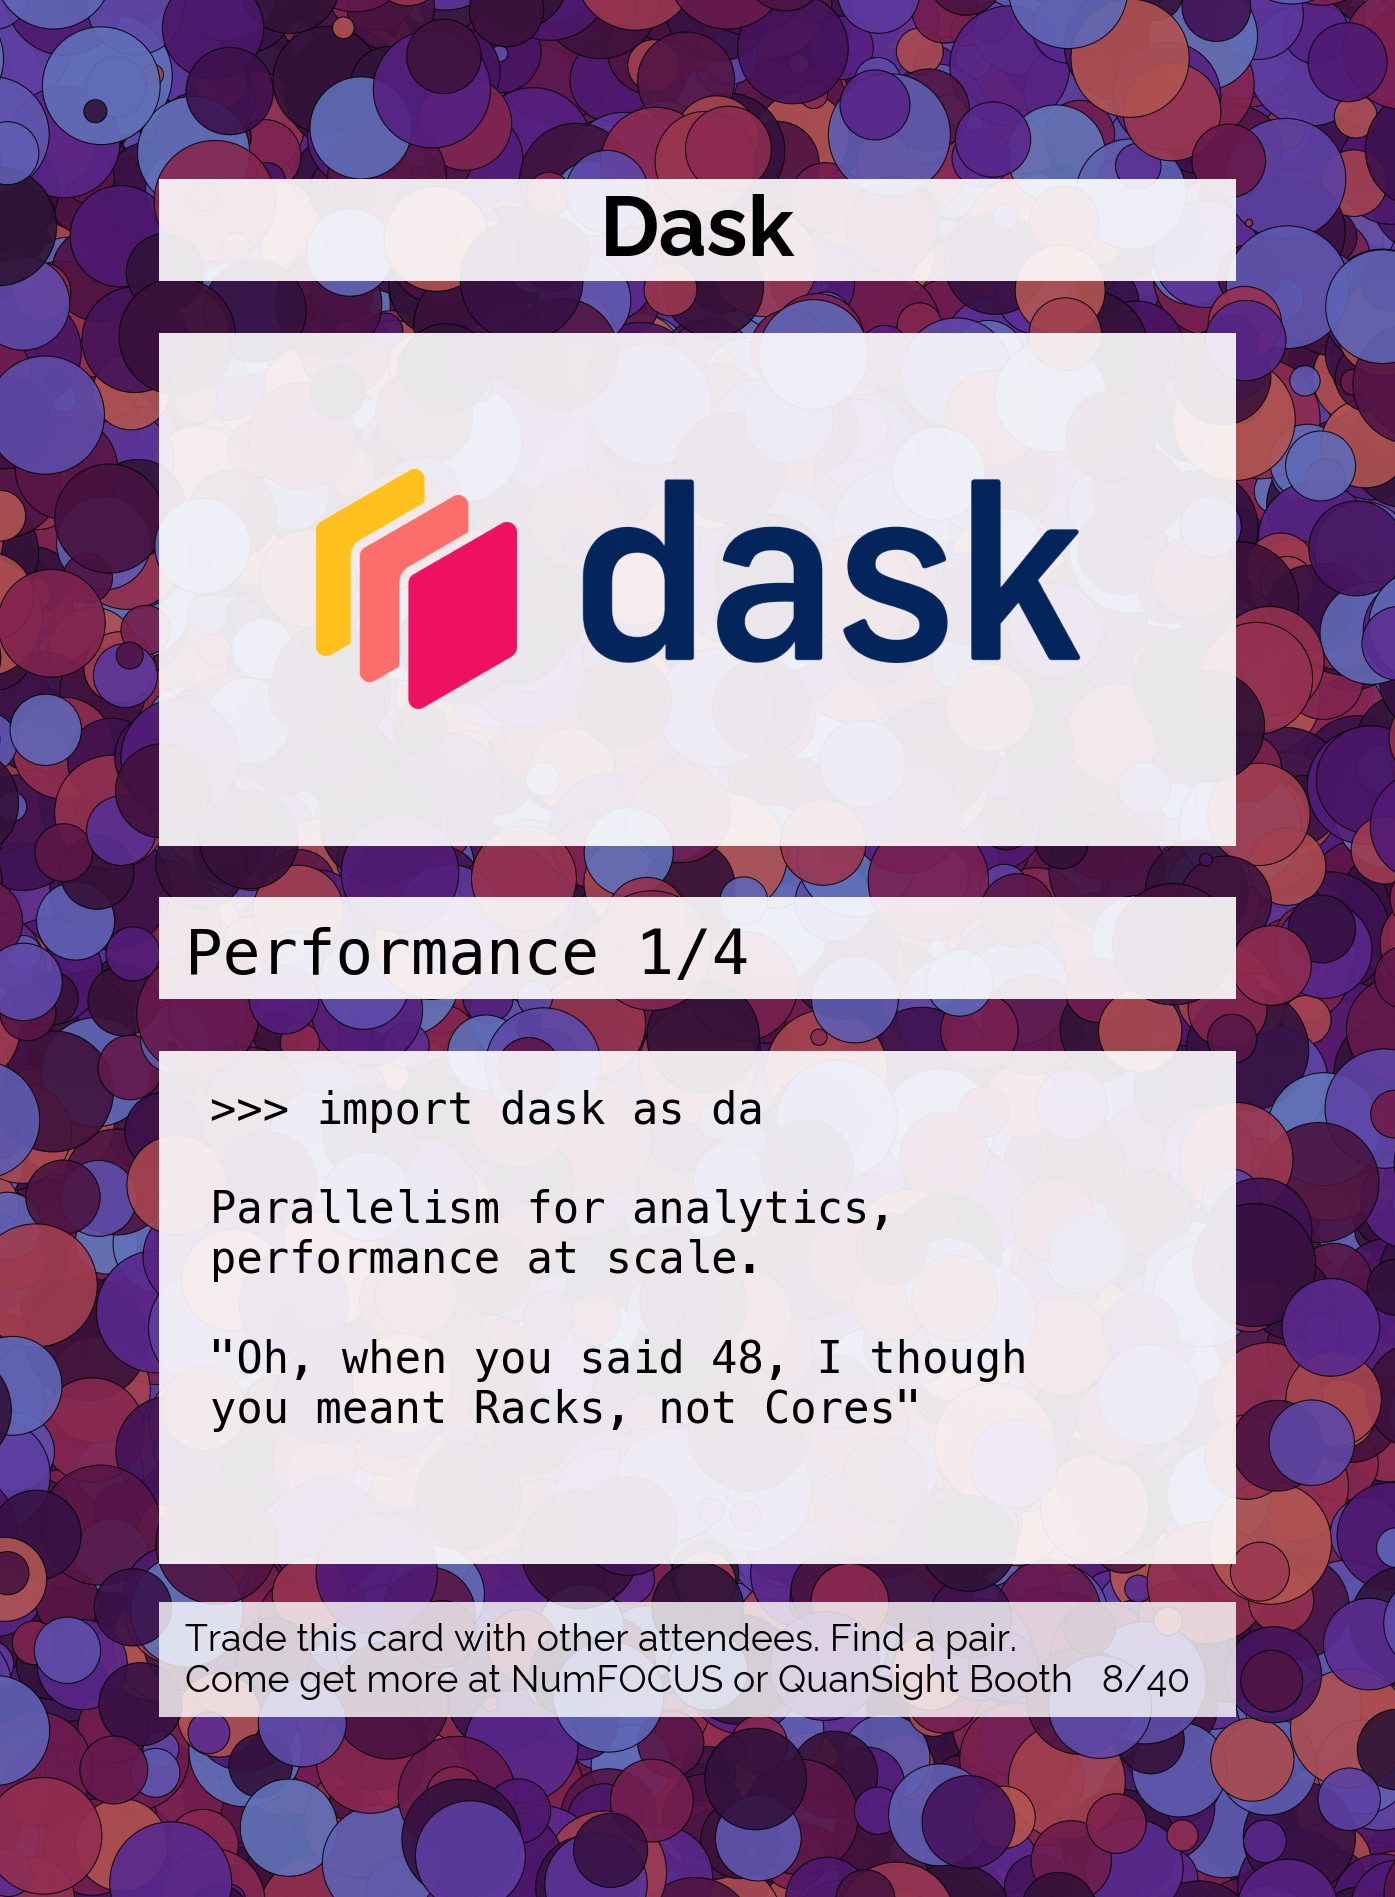 Performance-8-Dask-card.png